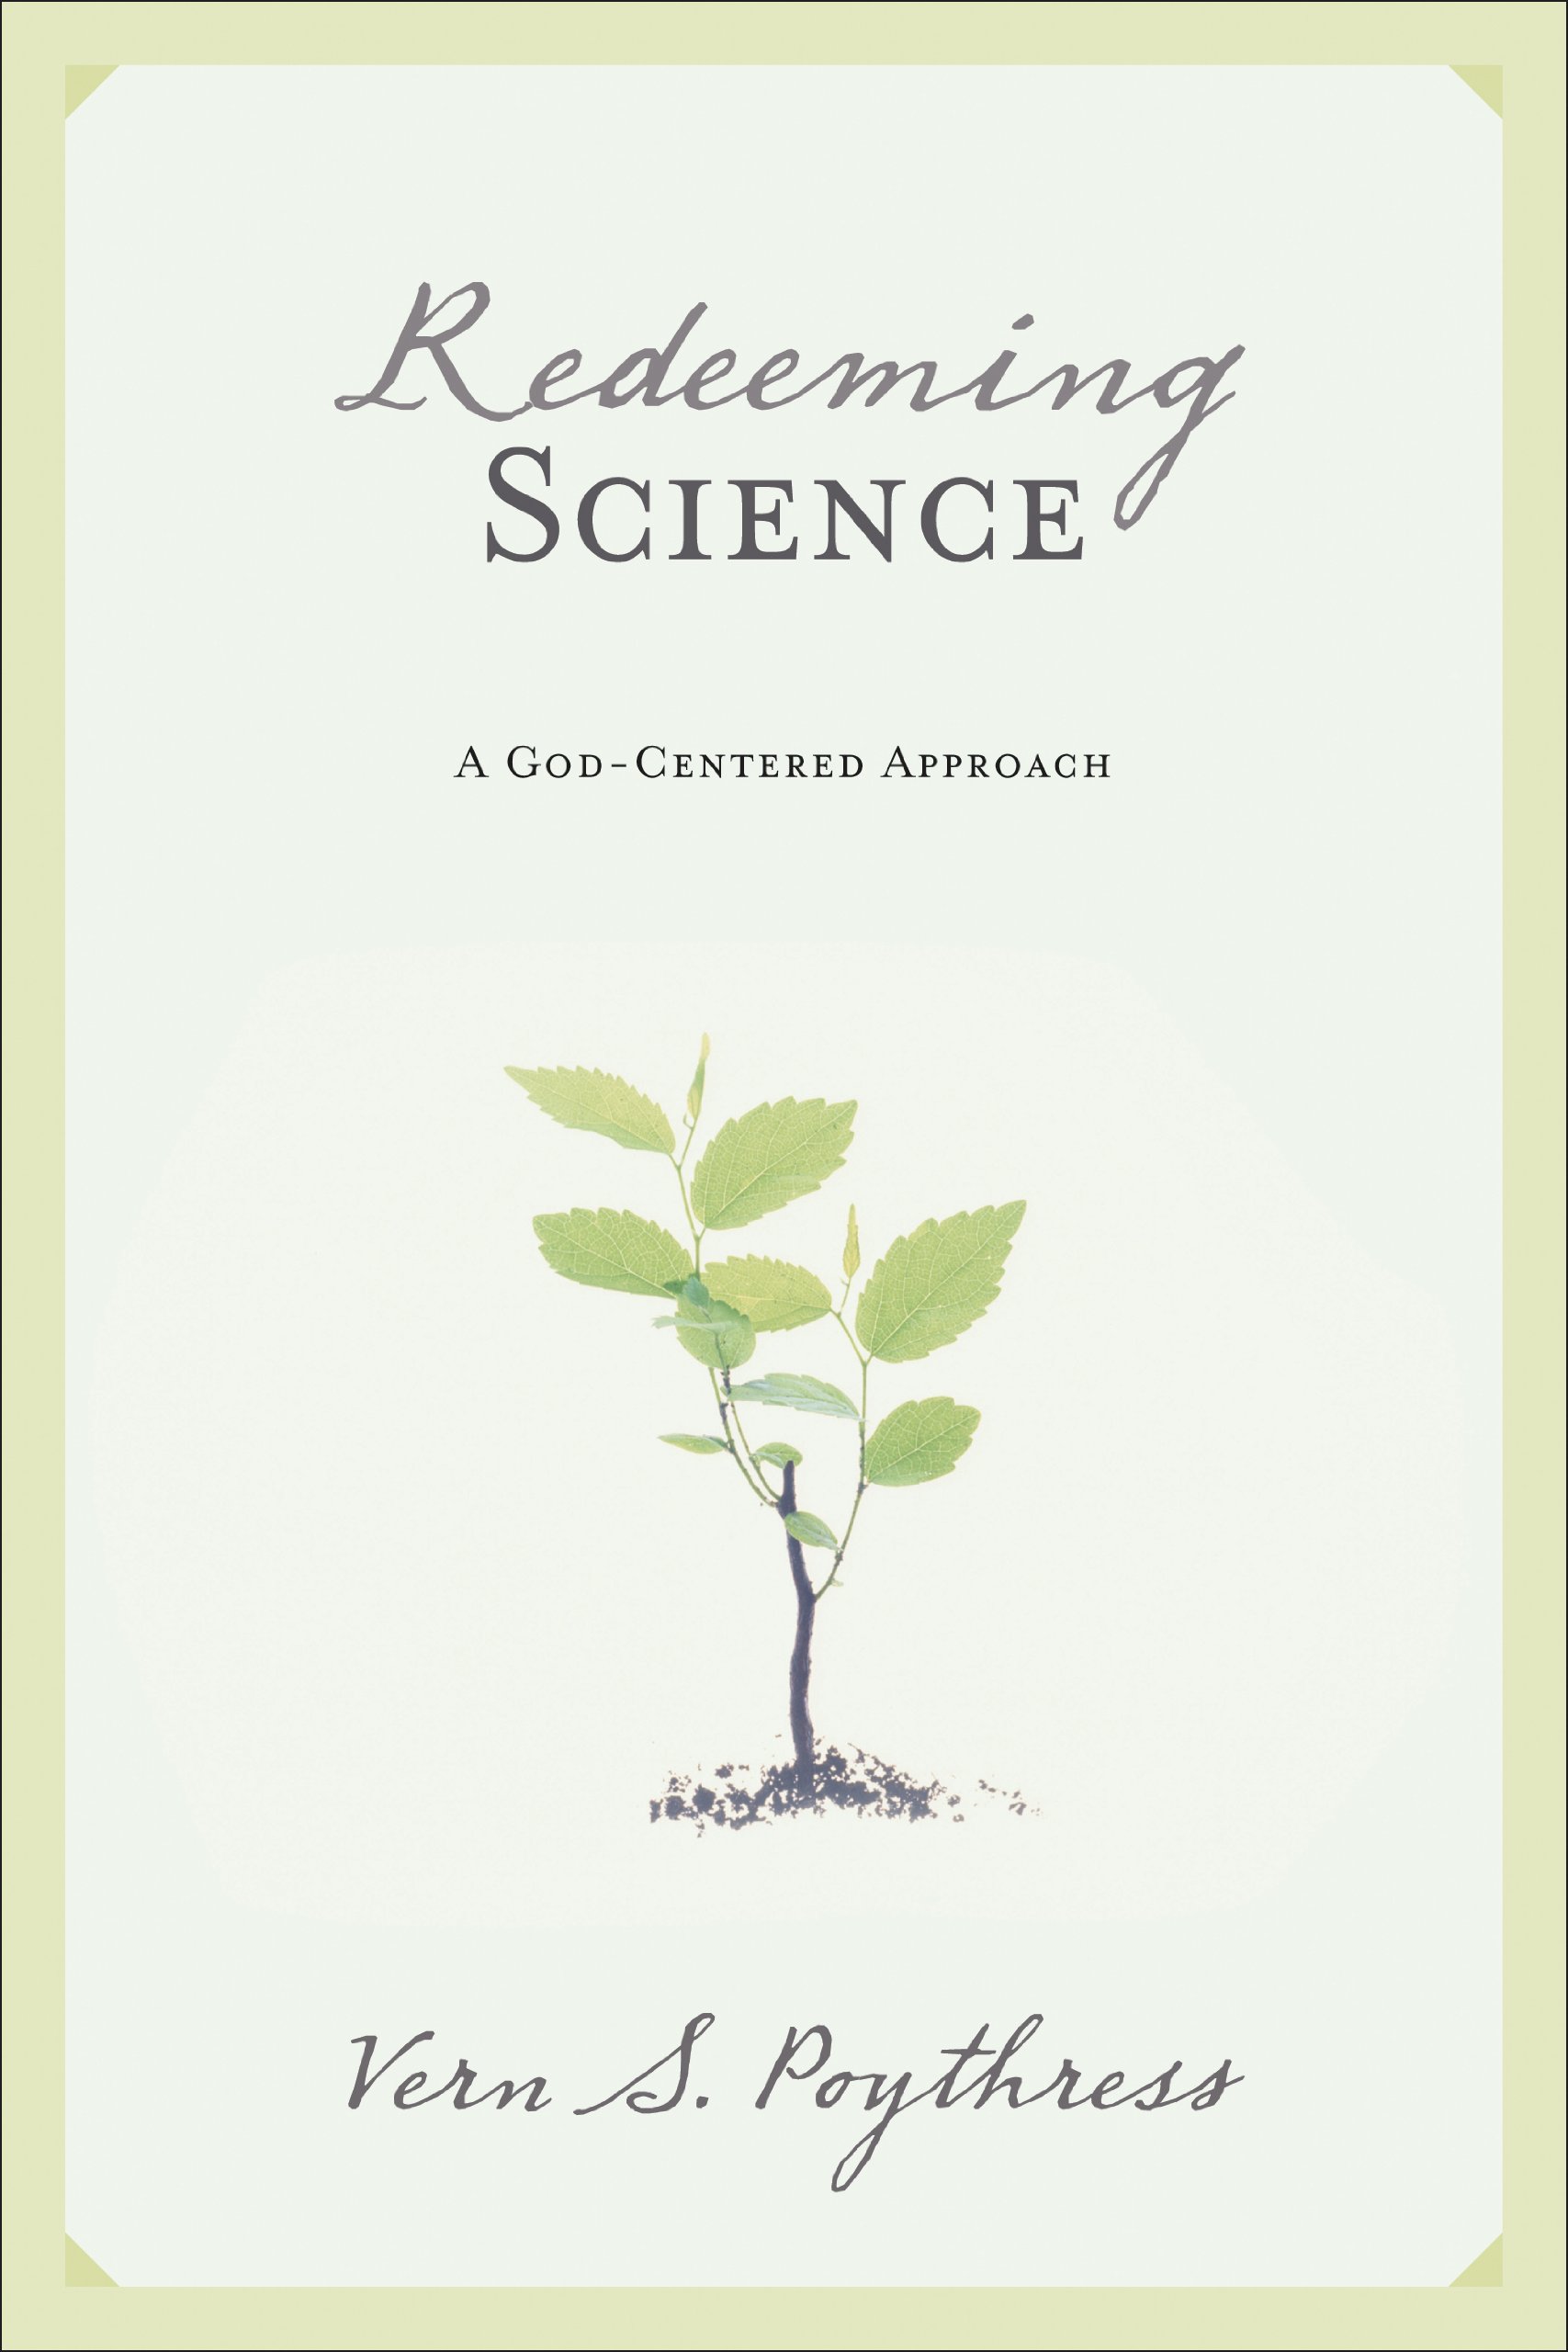 Book Notice: REDEEMING SCIENCE: A GOD-CENTERED APPROACH, by Vern S. Poythress